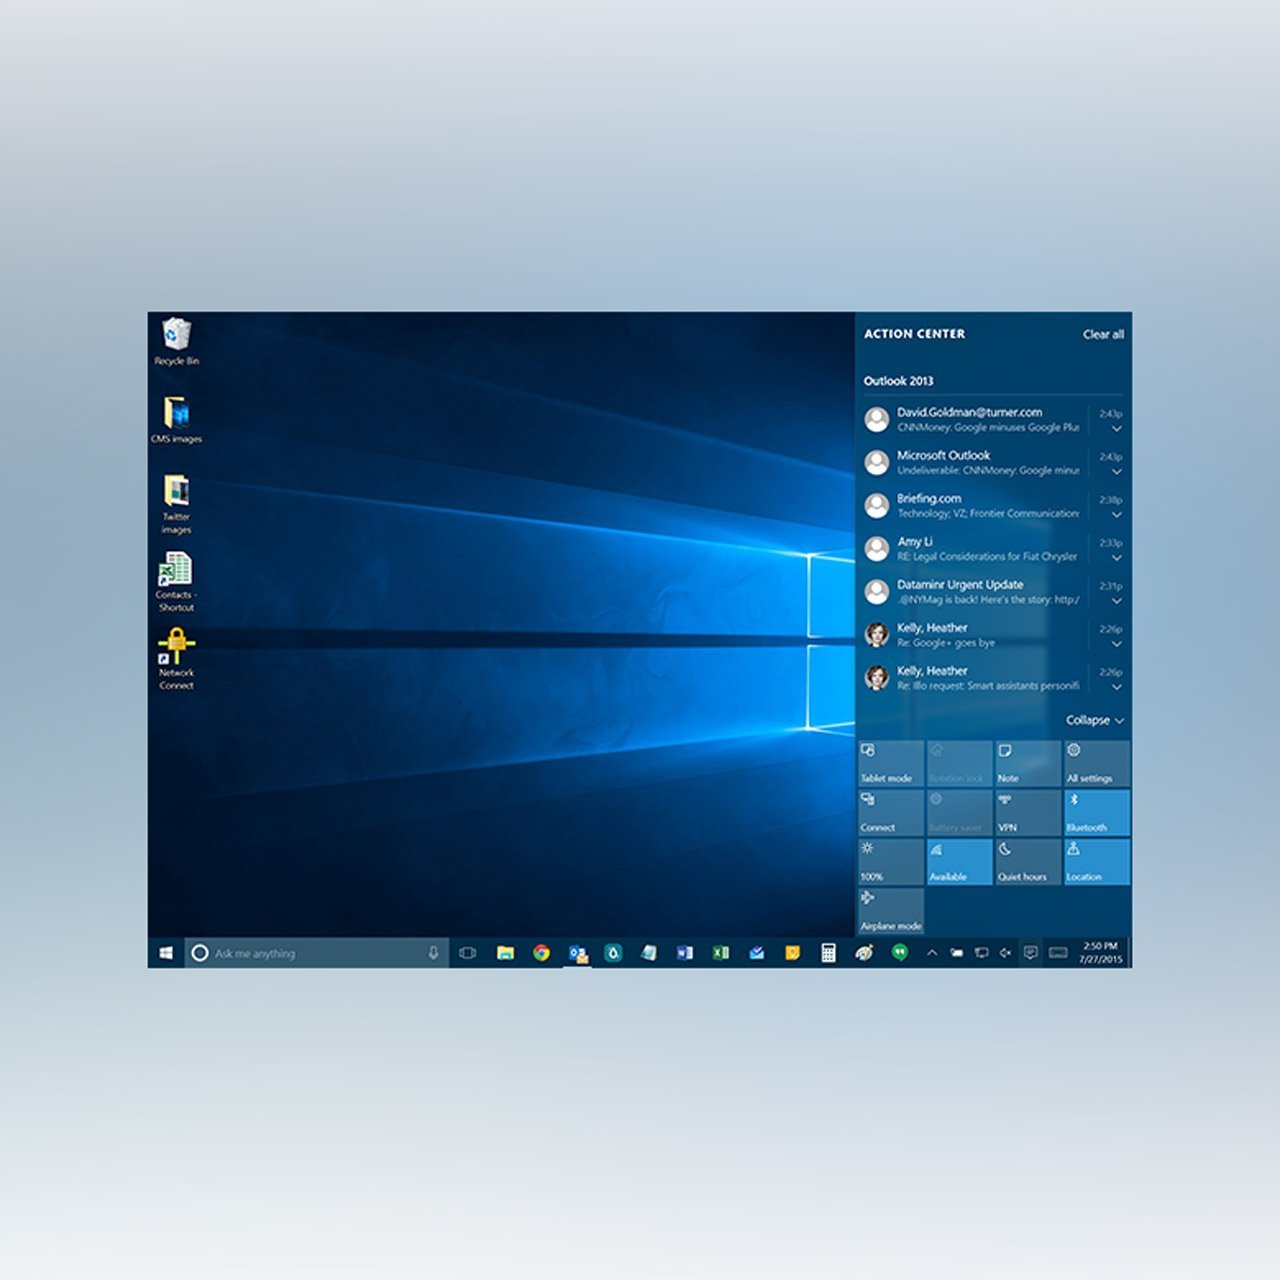 Windows 10 launched in July, 2015 and it's everything a PC operating system should be: familiar, beautiful, easy to use and helpful in unexpected ways. The best part: it's a free upgrade for just about everyone currently running Windows 7 and 8. One month later and it is now running on an astounding 75 million PCs.